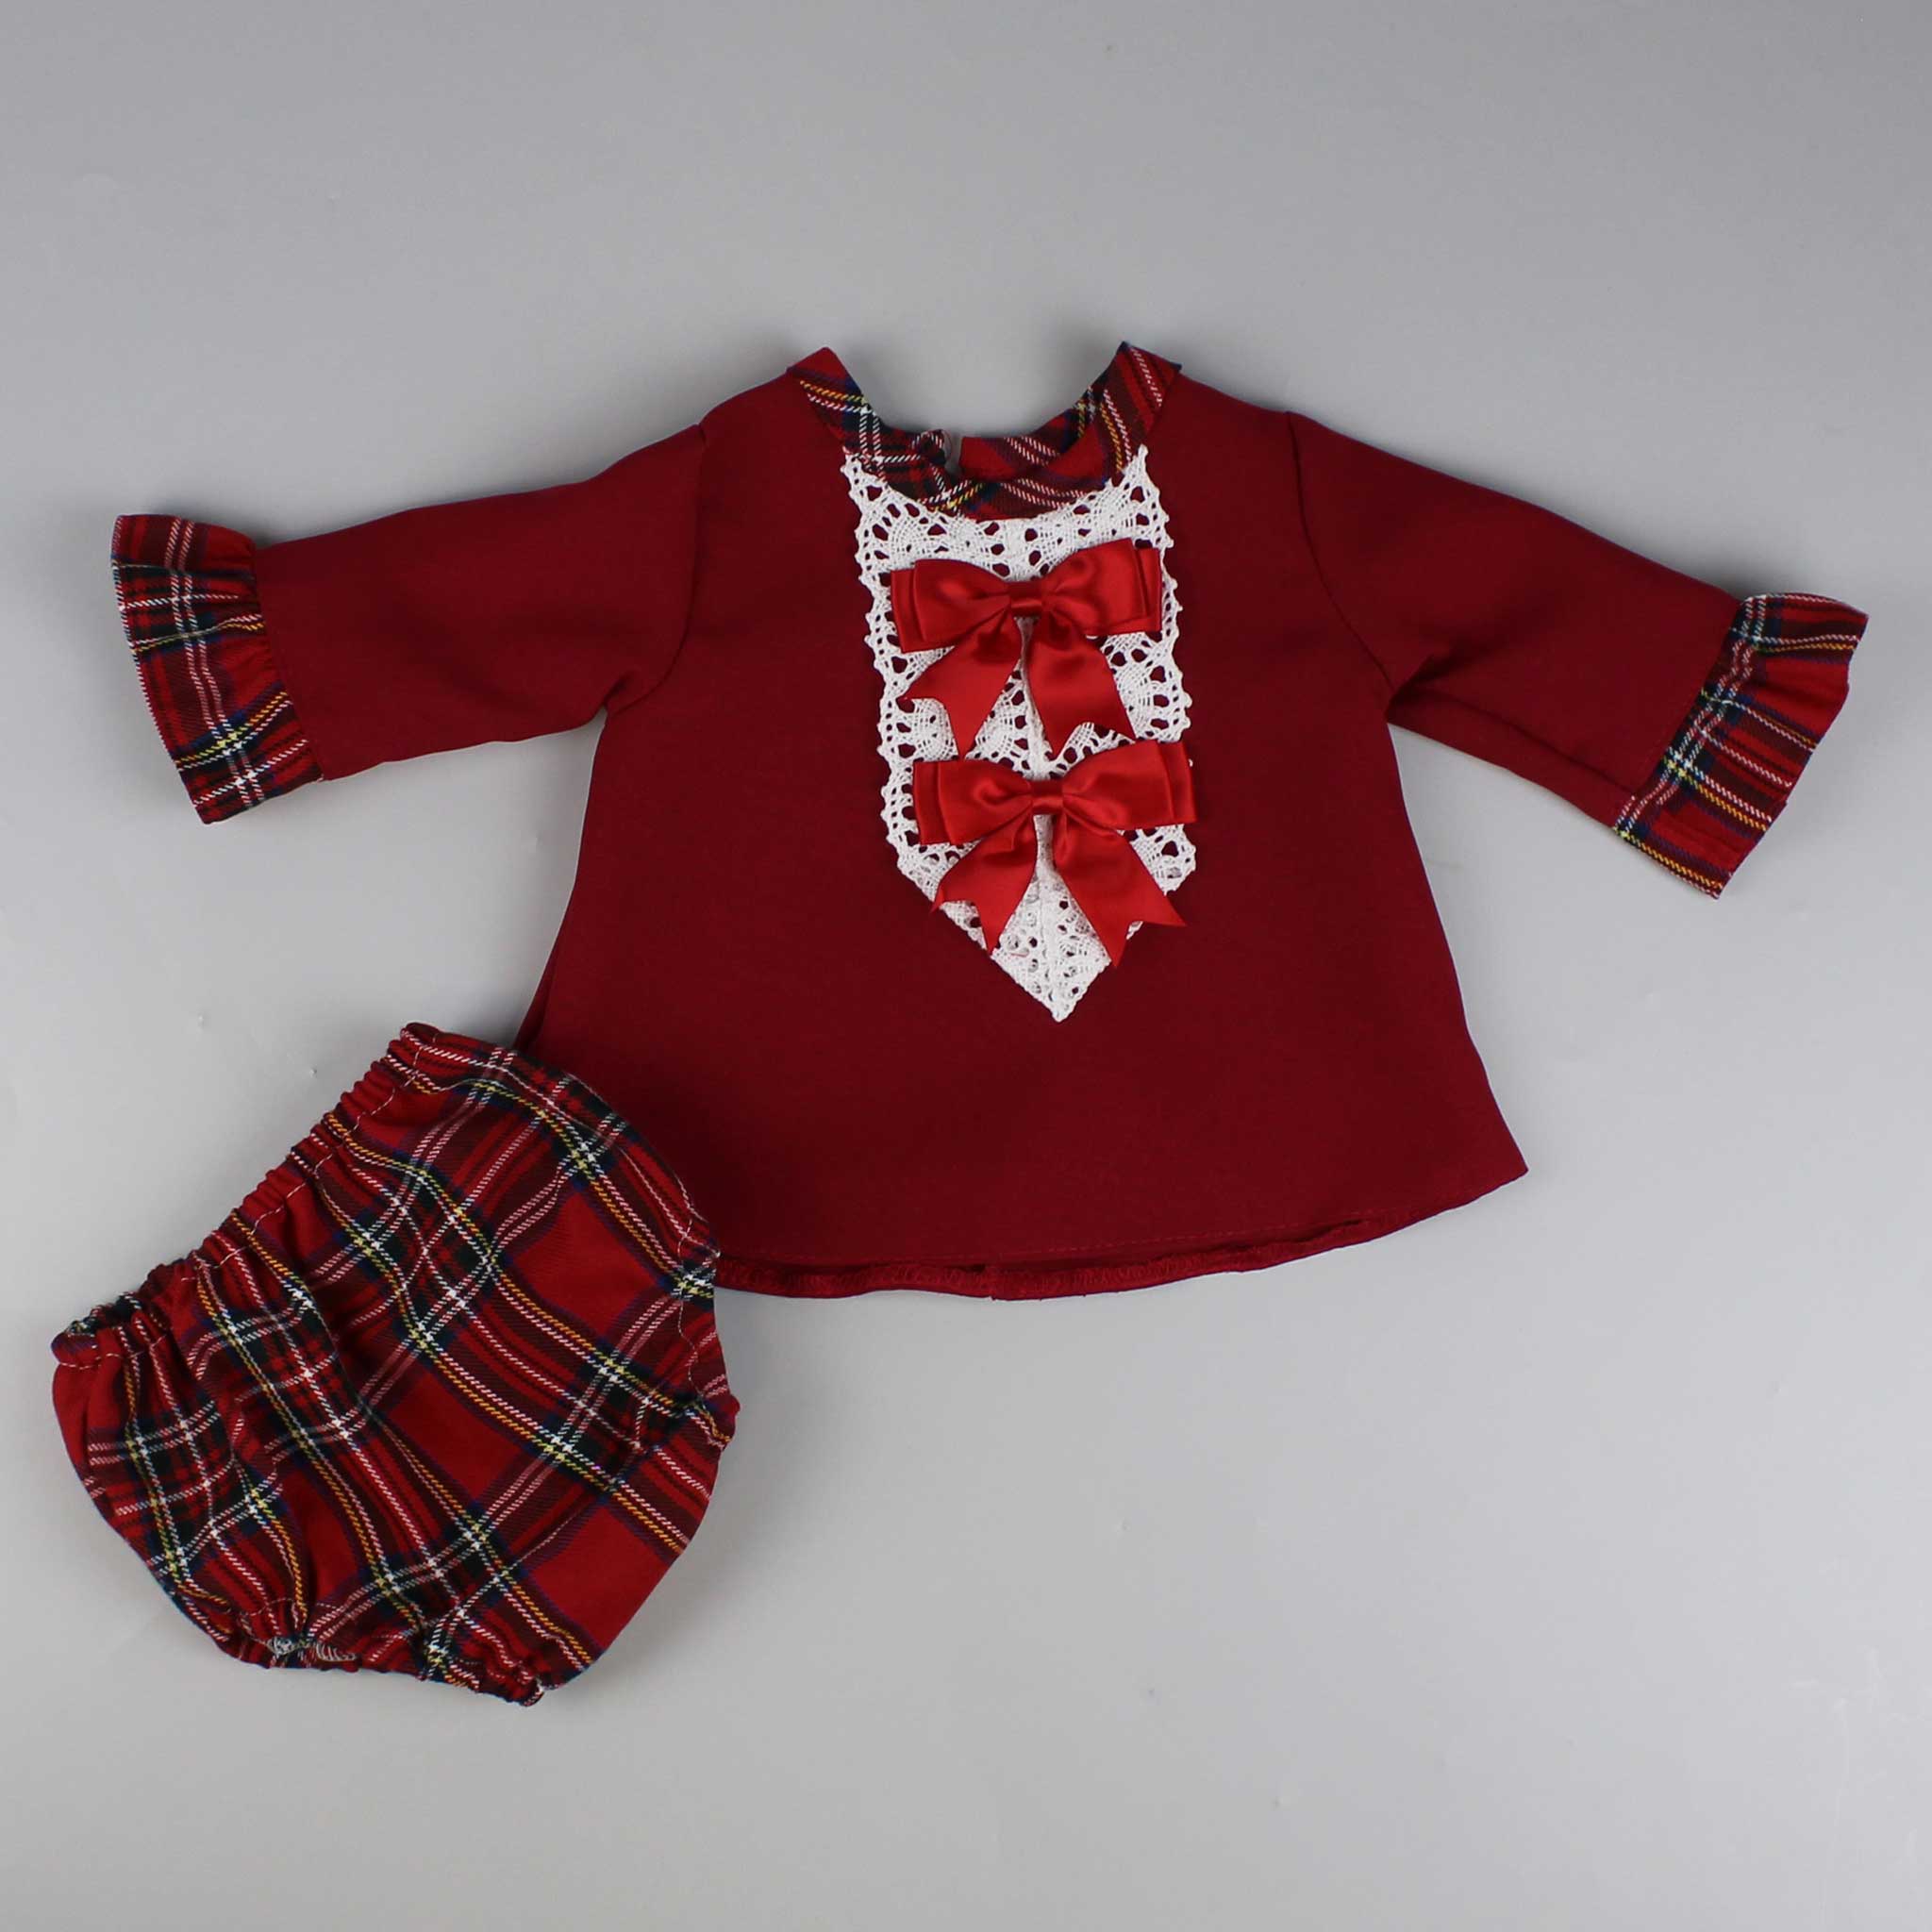 red and white two two piece outfit with two bows